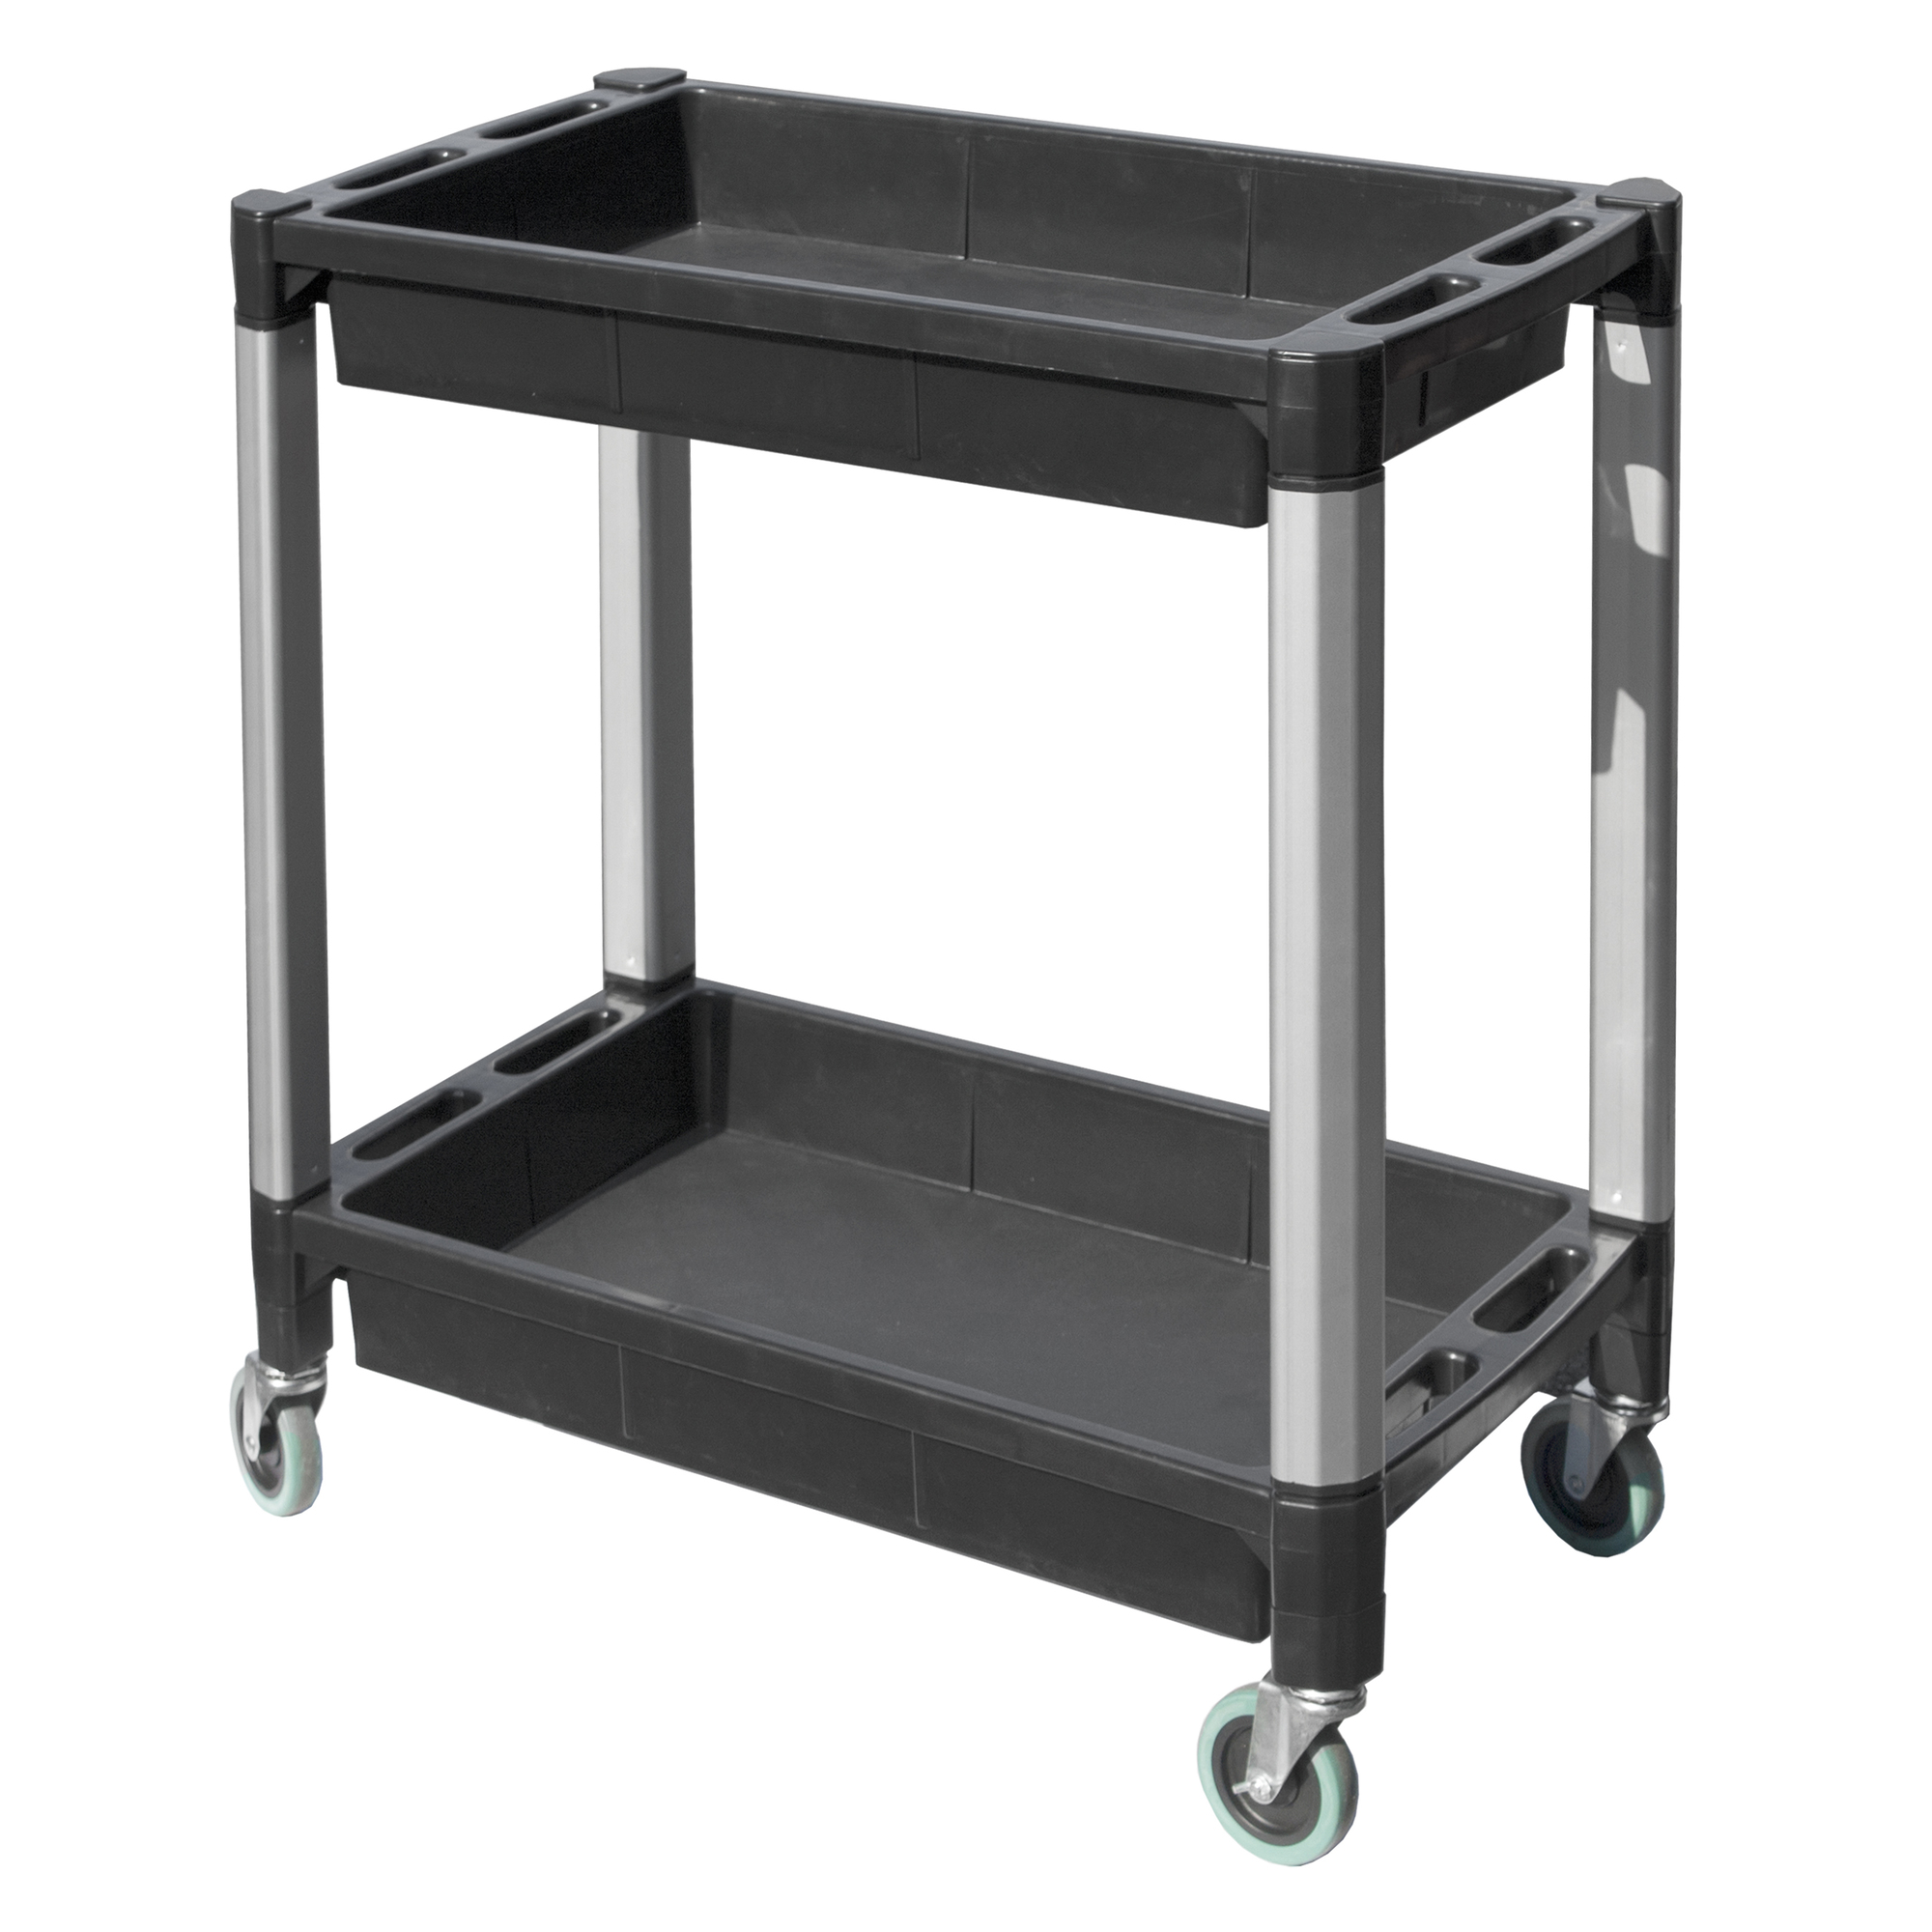 Avitec, Utility Service Cart with Two Trays, Total Capacity 300 lb, Shelves (qty.) 2 Material Polypropylene, Model BAC-110103